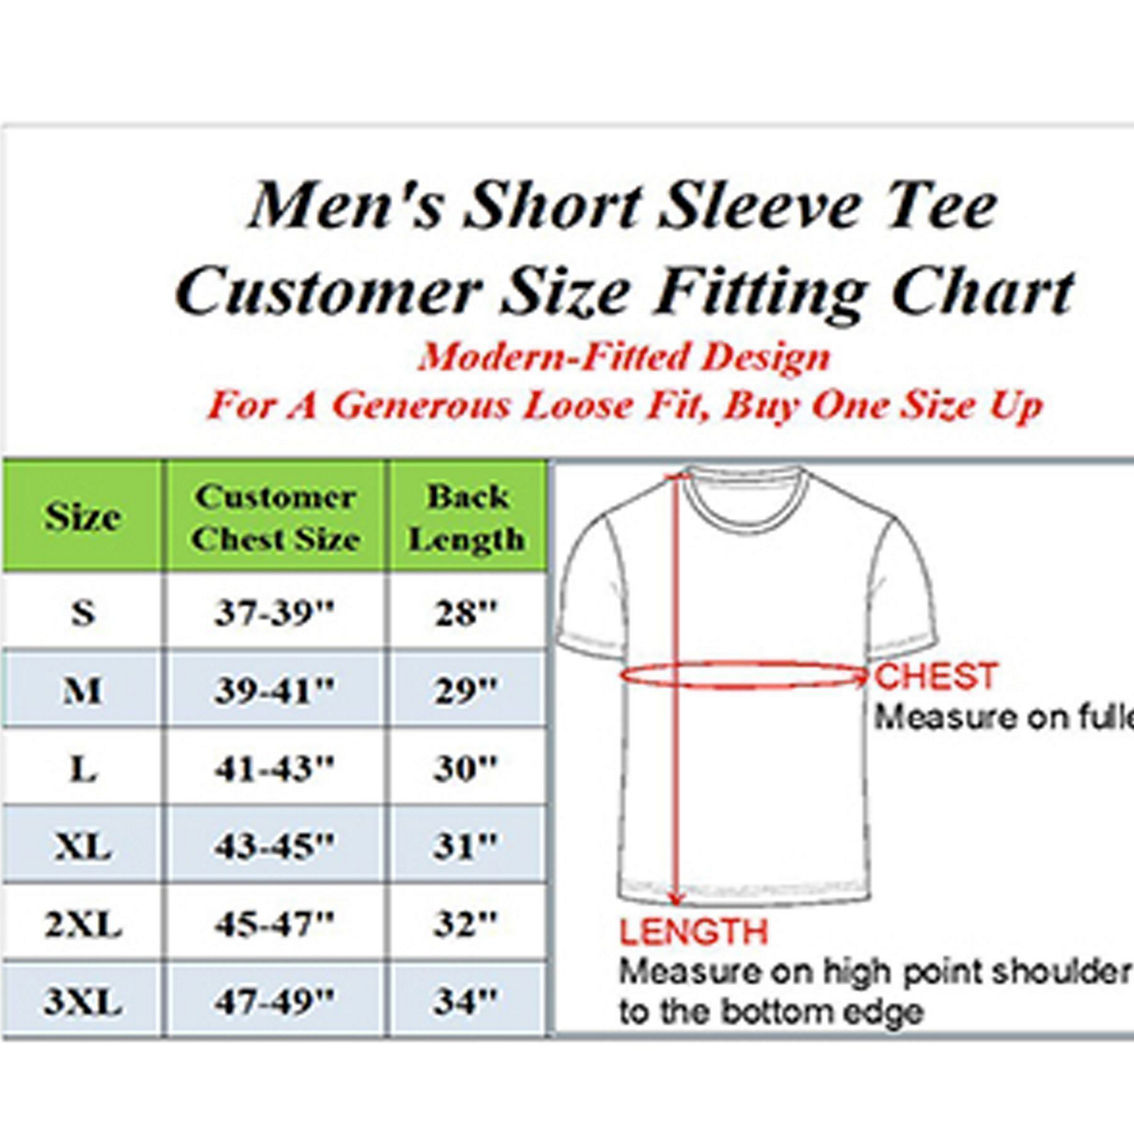 Blue Ice Men's Short Sleeve Crew Neck Classic T-shirt-6 Pack - Image 2 of 3